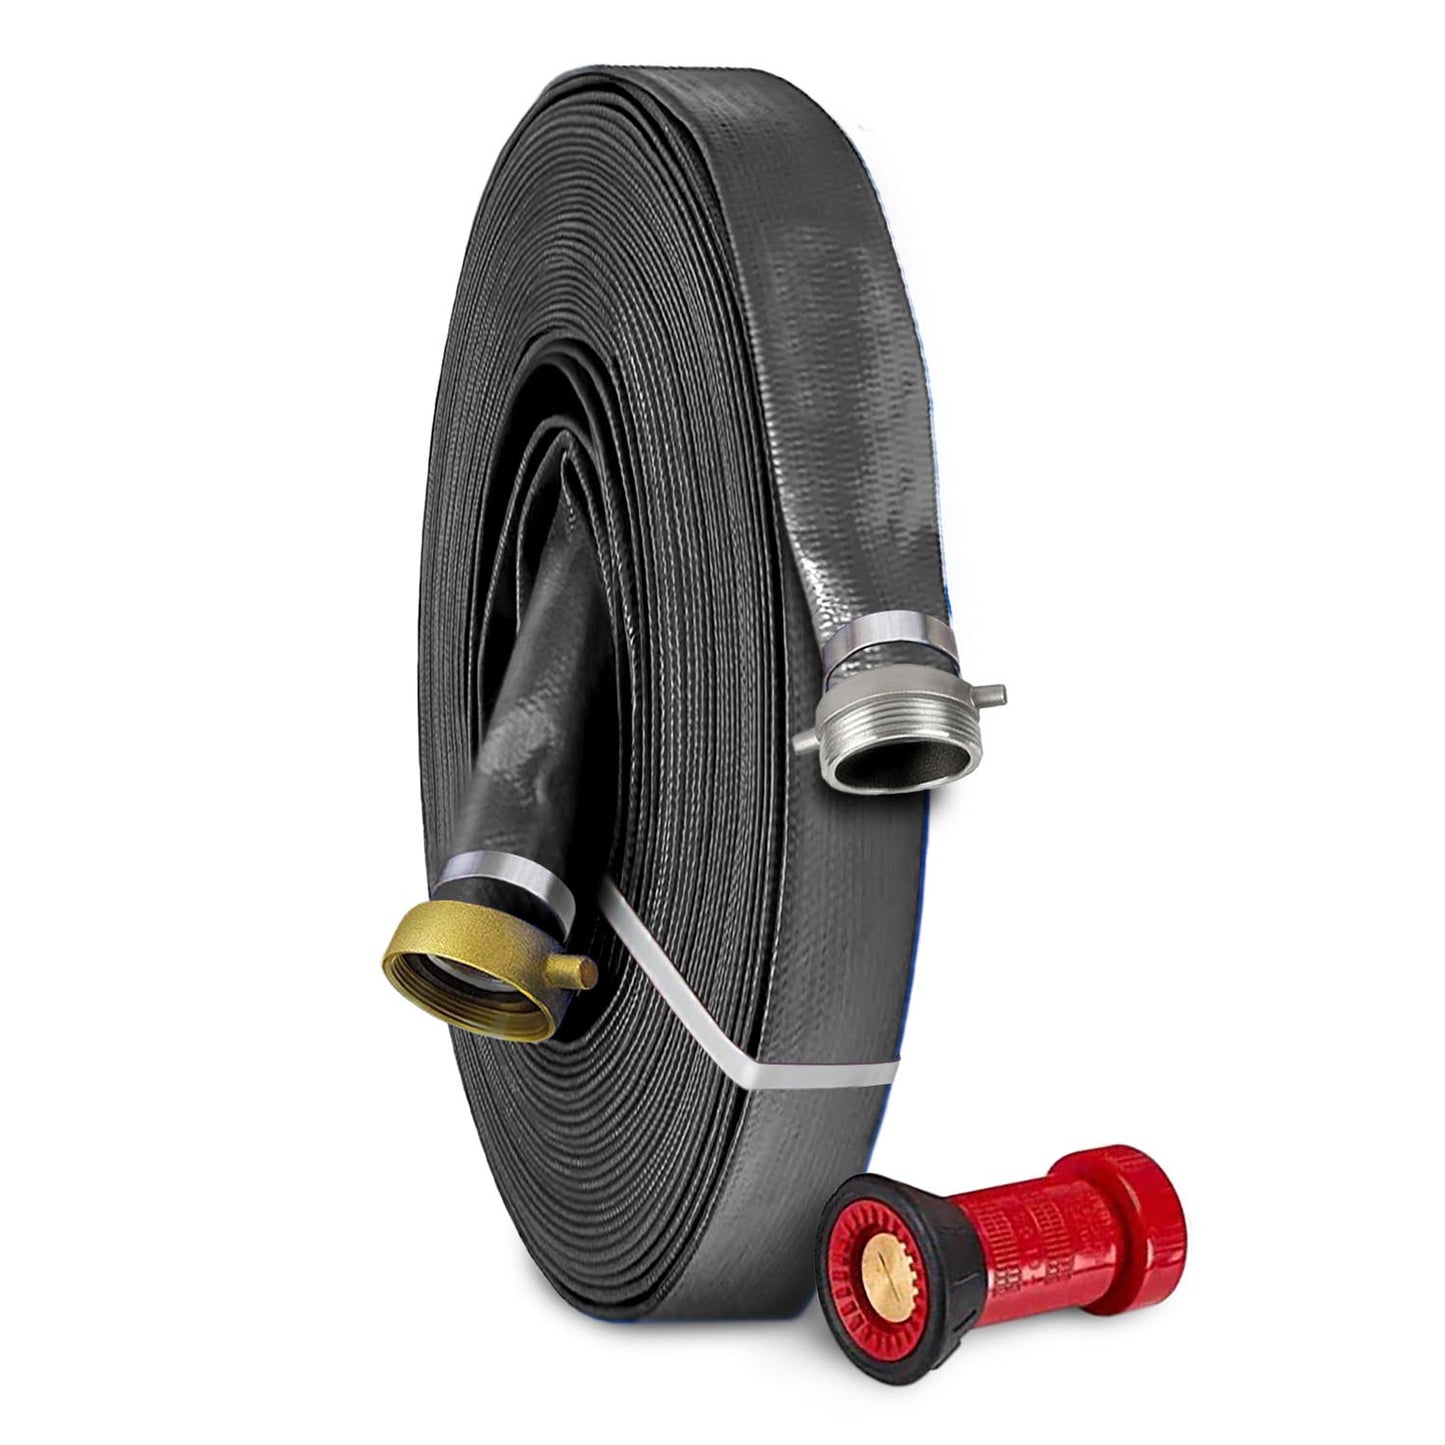 Foresee 1-1/2 IN x 100 FT PVC Watering Hose Kit with Pin Lug Couplings includes Spray Pattern Nozzle